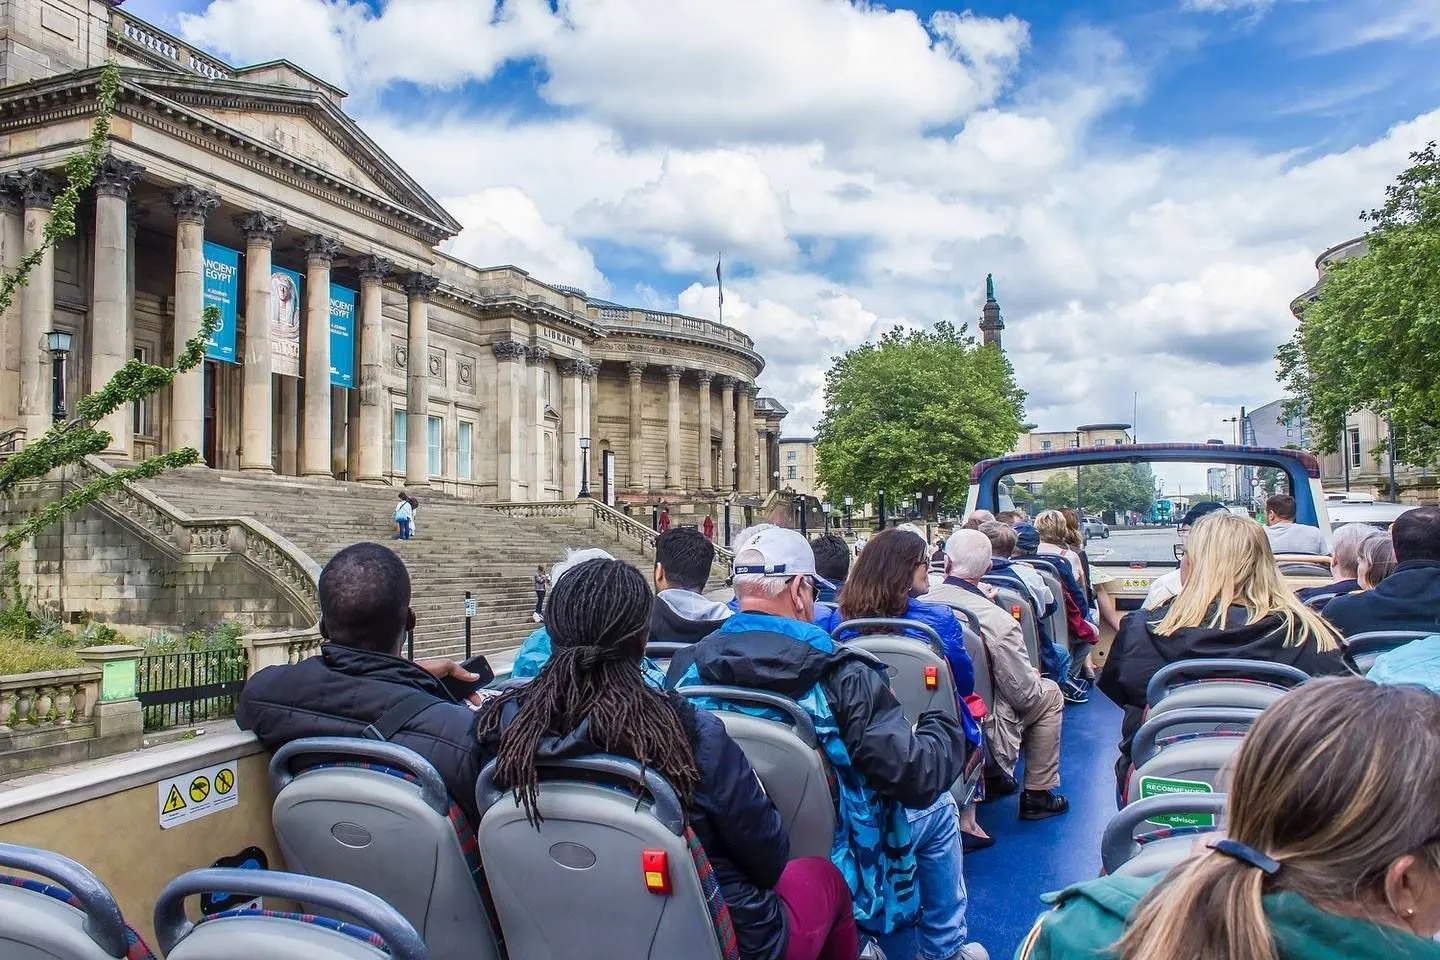 Check out The Cavern Quarter, Albert Dock, Pier Head, Liverpool One, and more on this tour. Buy Liverpool bus tour tickets.